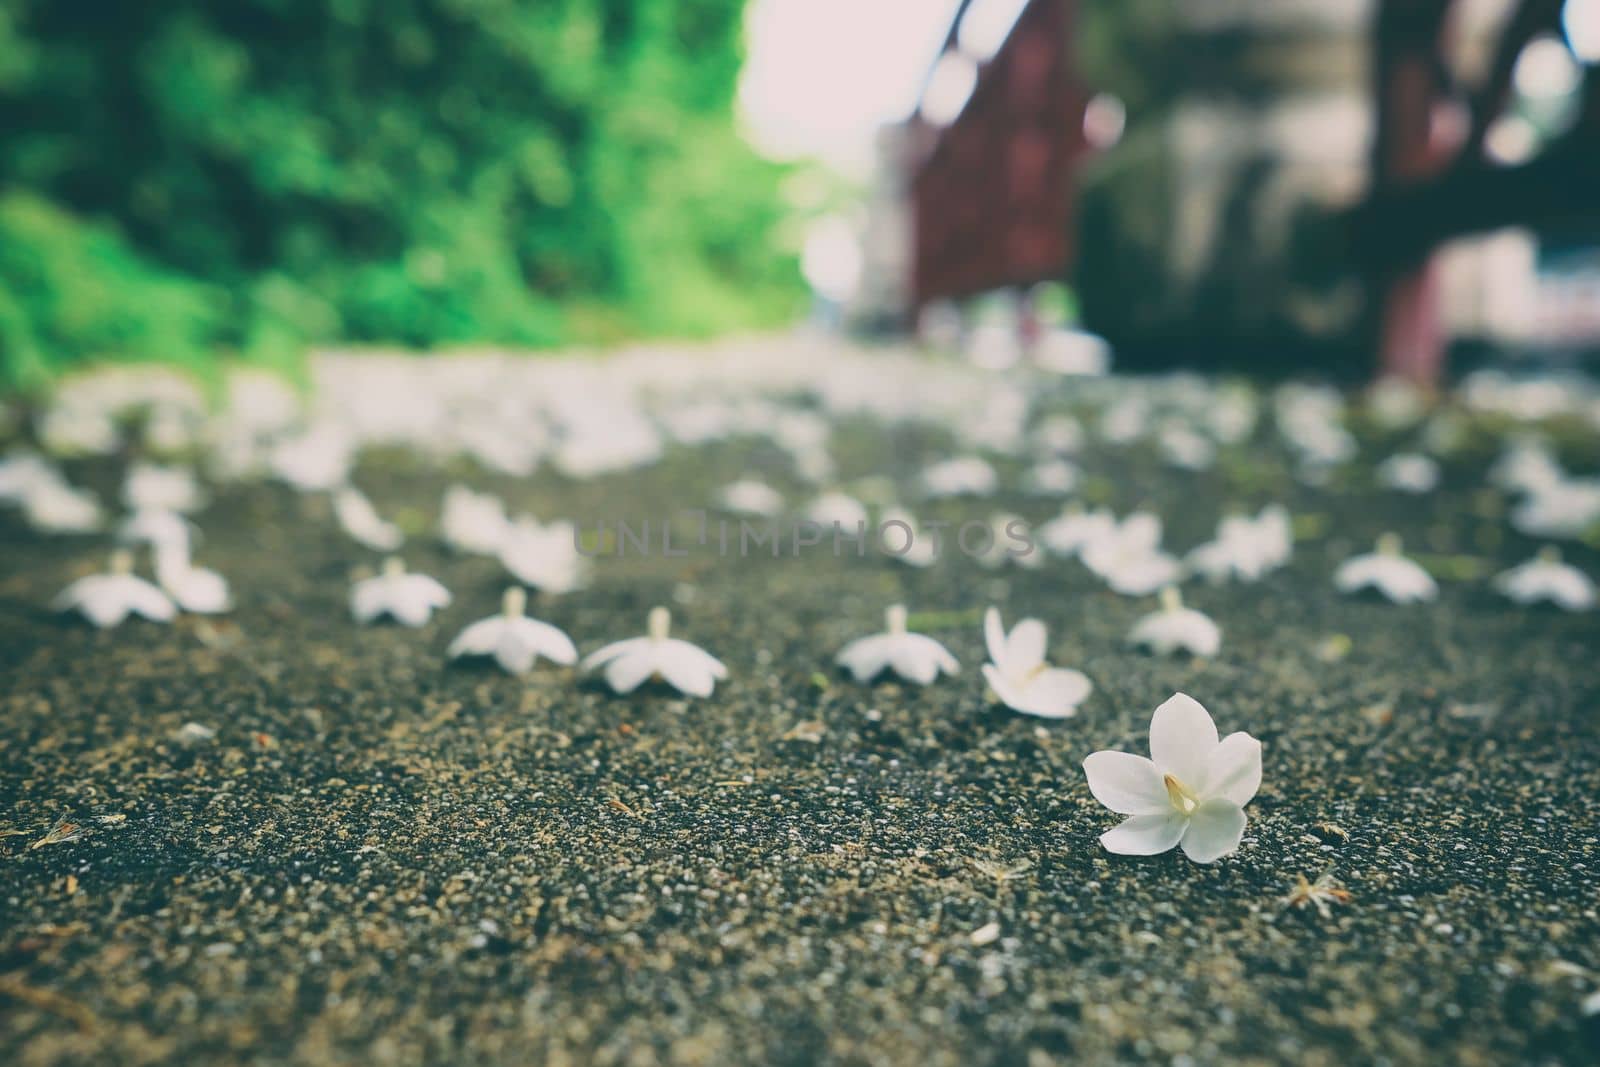 Closed-up White Wild Water Plum Flowers on Ground in Vintage Style. (Selective Focus) by mesamong